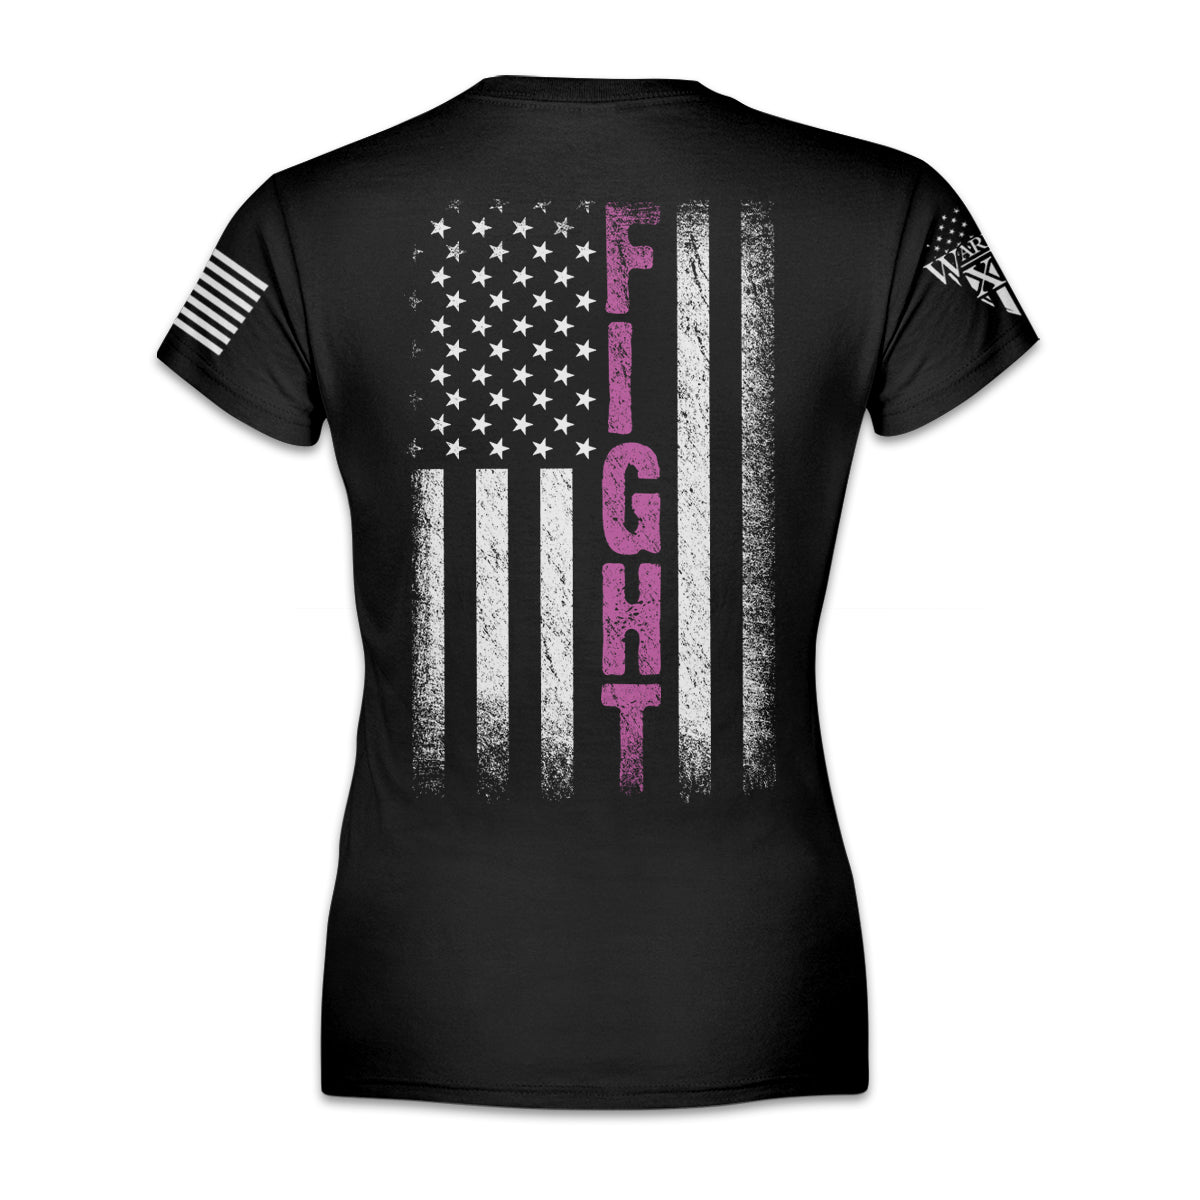 A women's black t-shirt with the words "Fight" within an American flag printed on the back of the shirt for breast cancer awareness Women's Shirt.